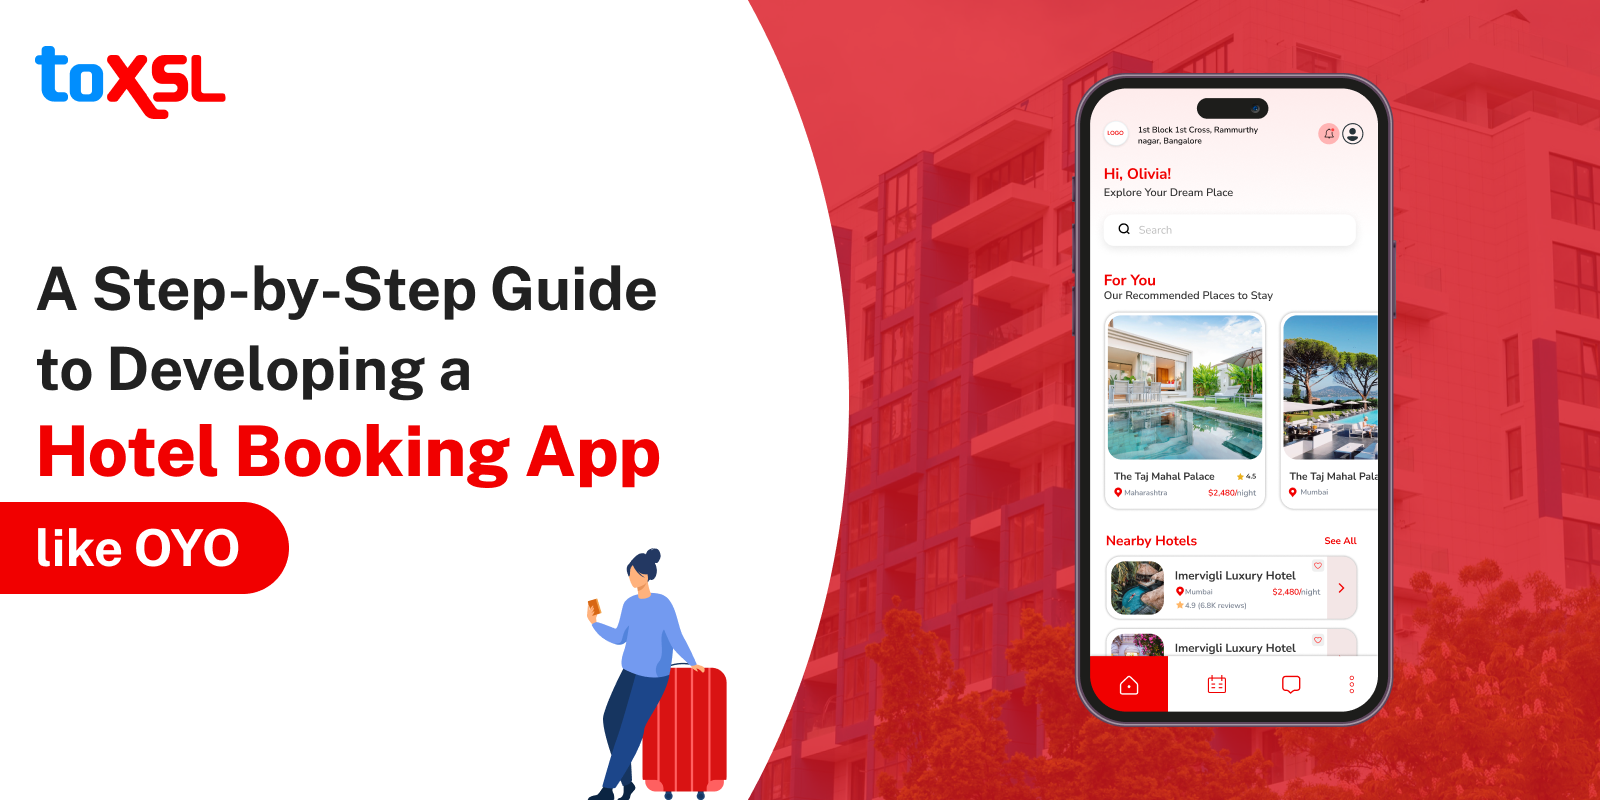 A Step-by-Step Guide to Developing a Hotel Booking App like OYO